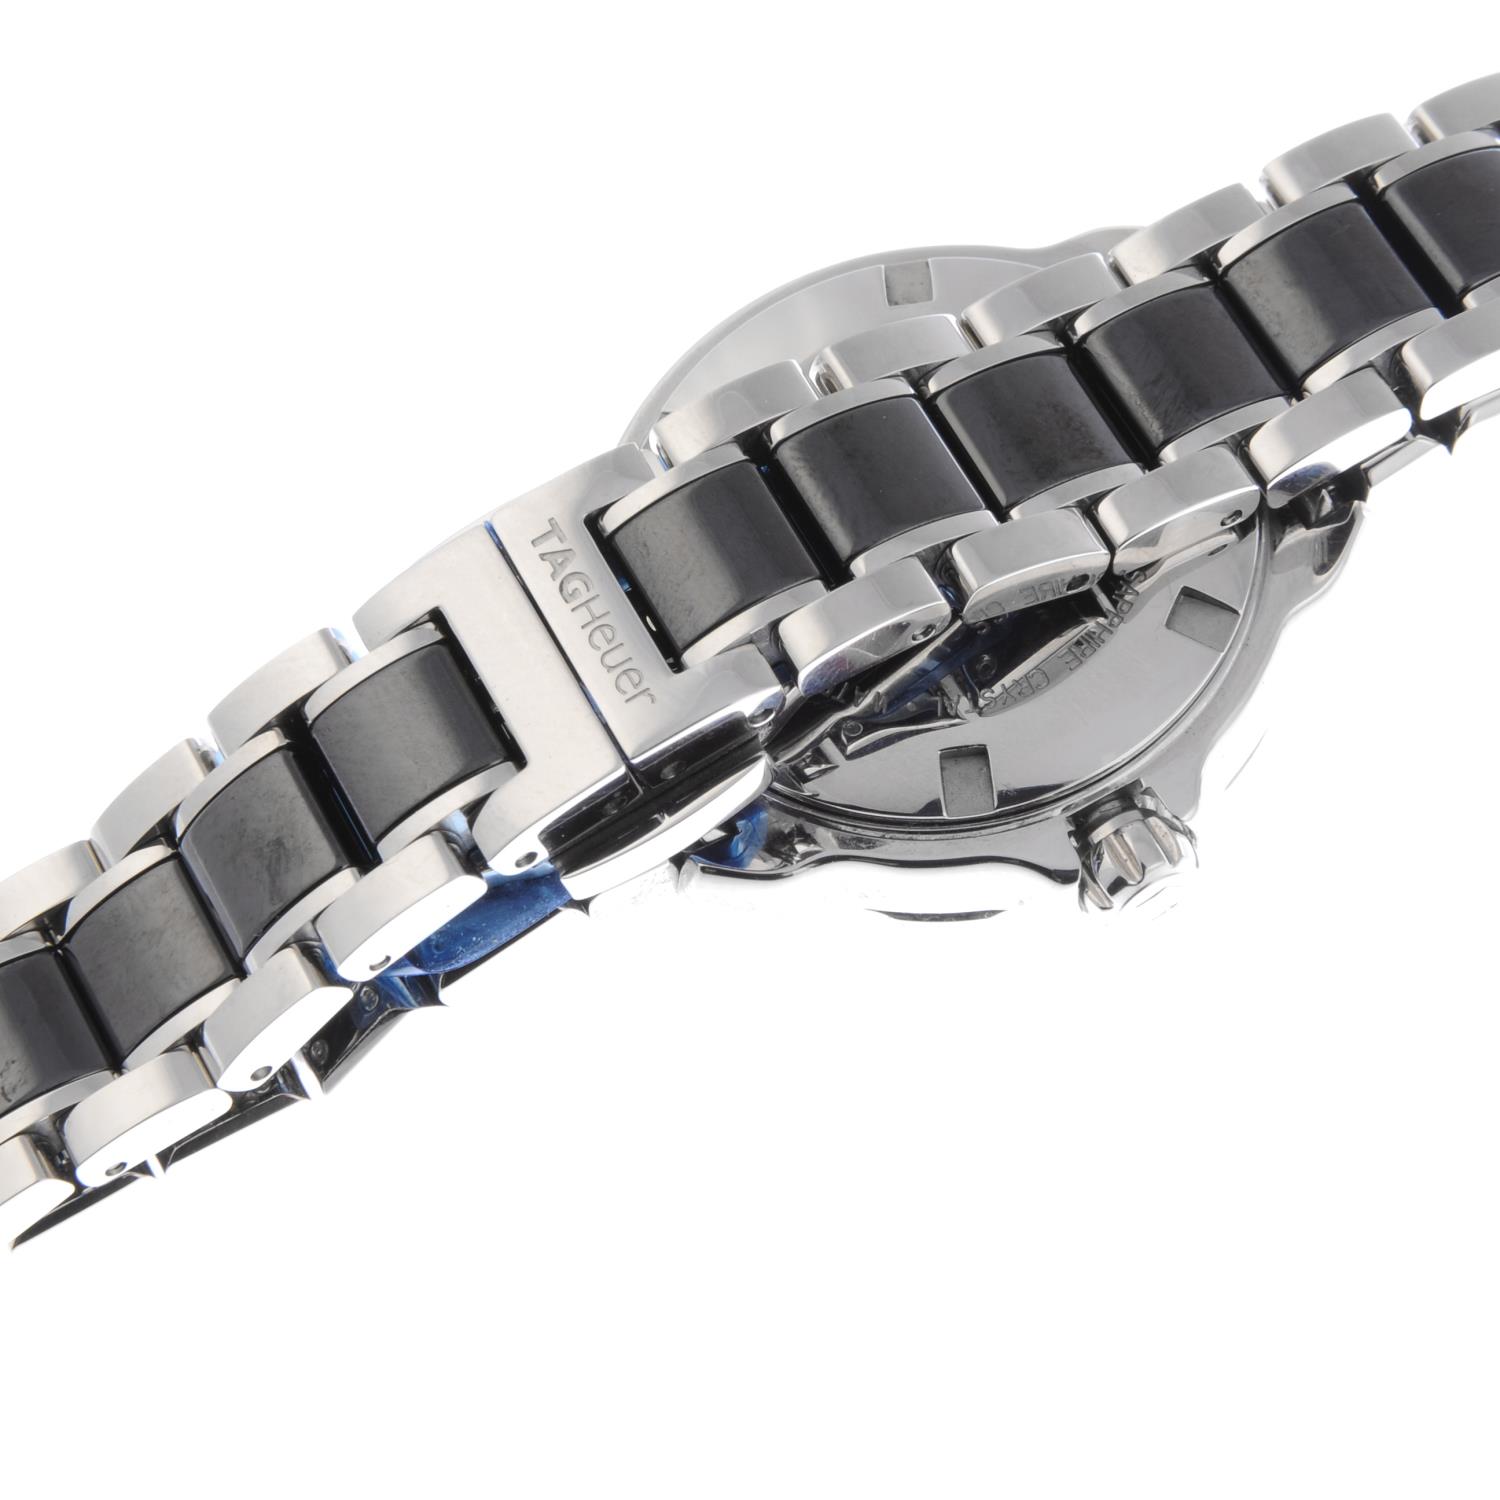 TAG HEUER - a lady's Formula 1 bracelet watch. Stainless steel case with ceramic calibrated bezel. - Image 2 of 7